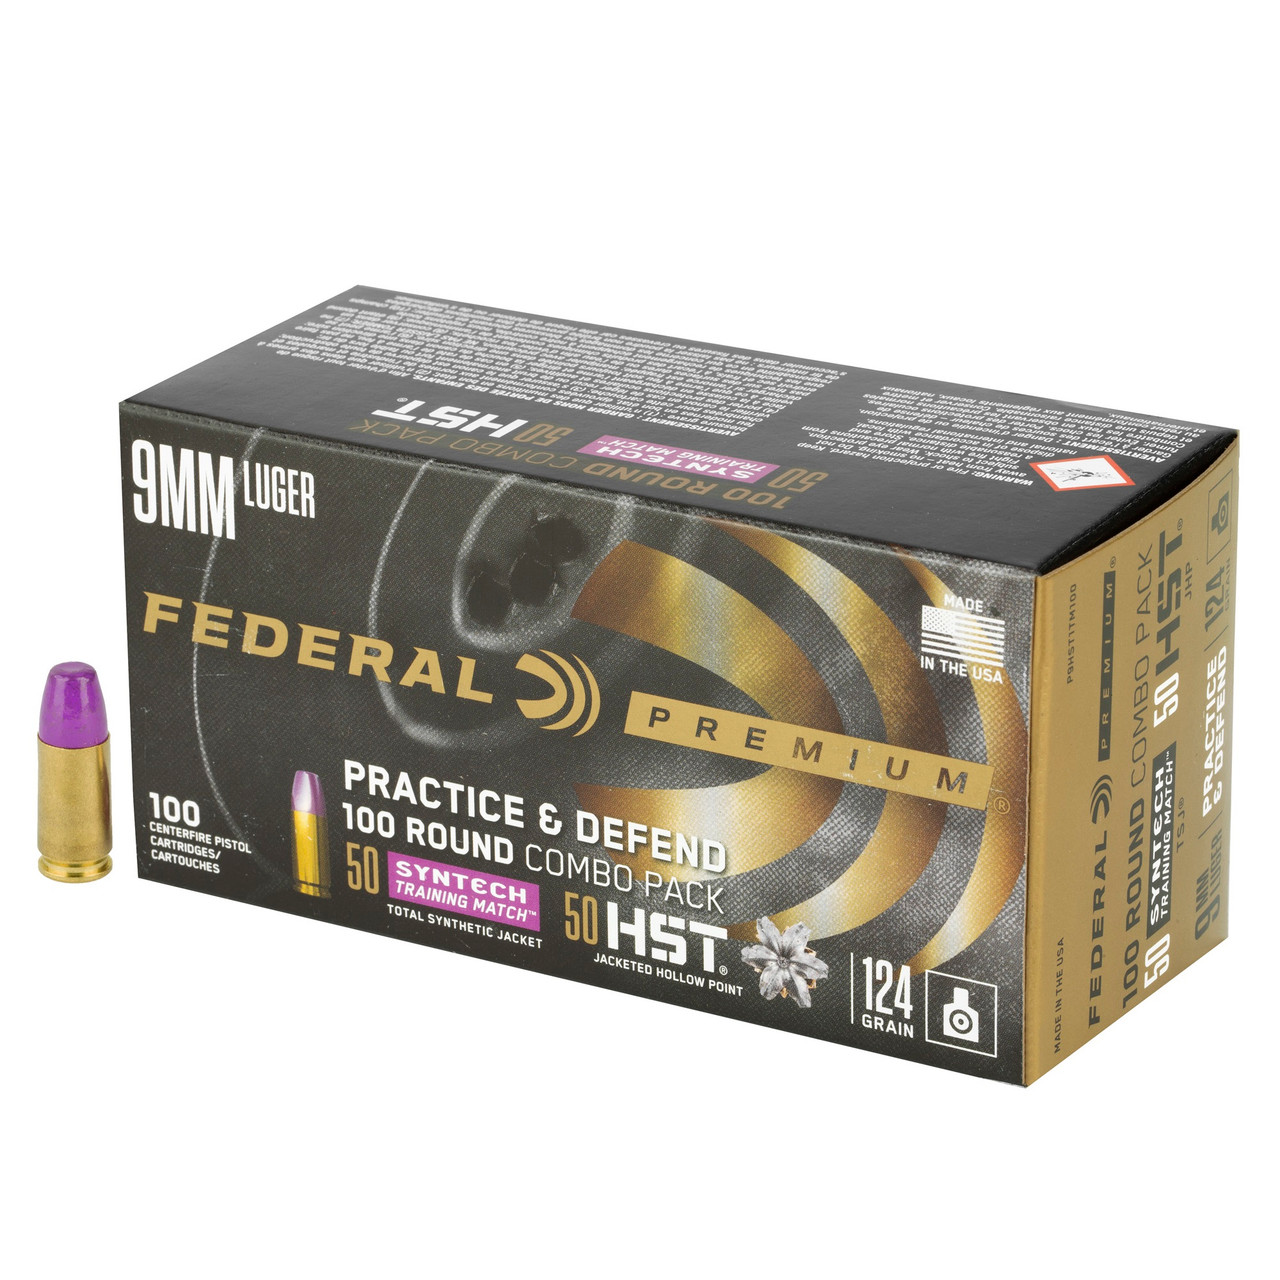 Federal Premium Practice & Defend Combo Pack 9mm Luger Ammo 124gr ...